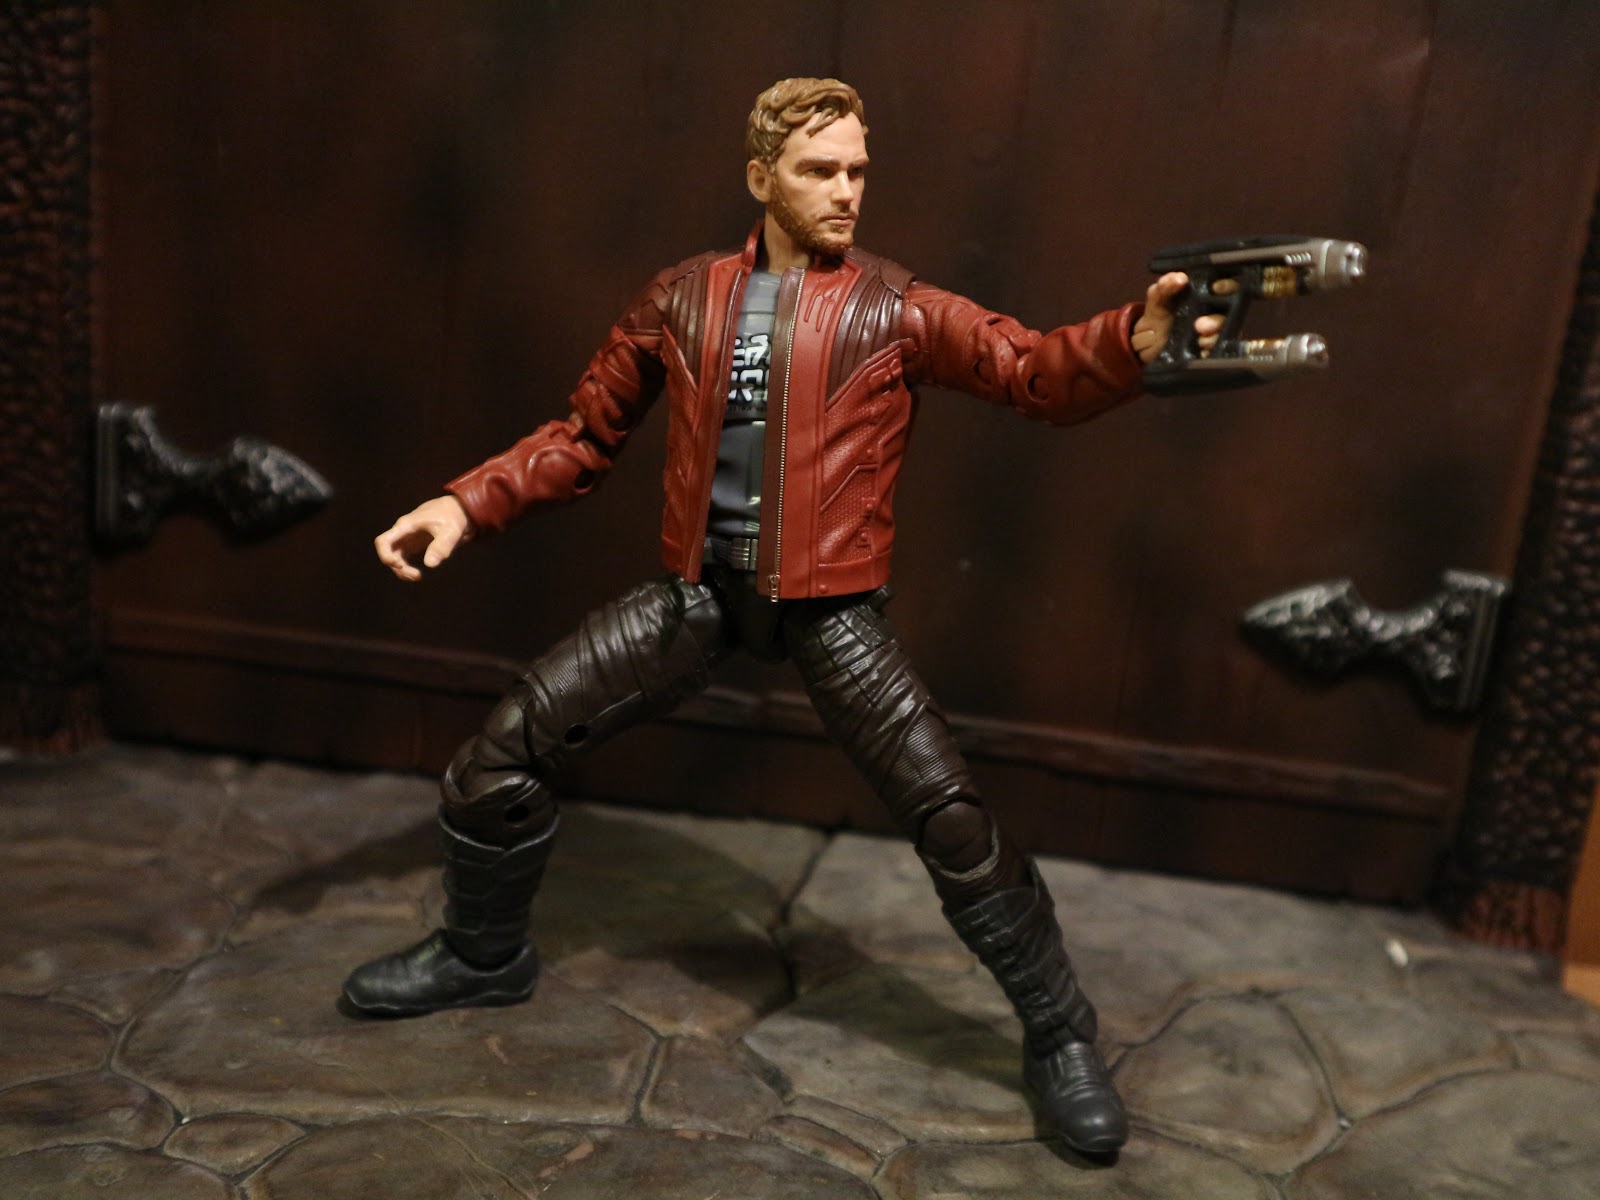 2017 Marvel Legends Star-Lord 6 Figure Review GOTG Vol. 2